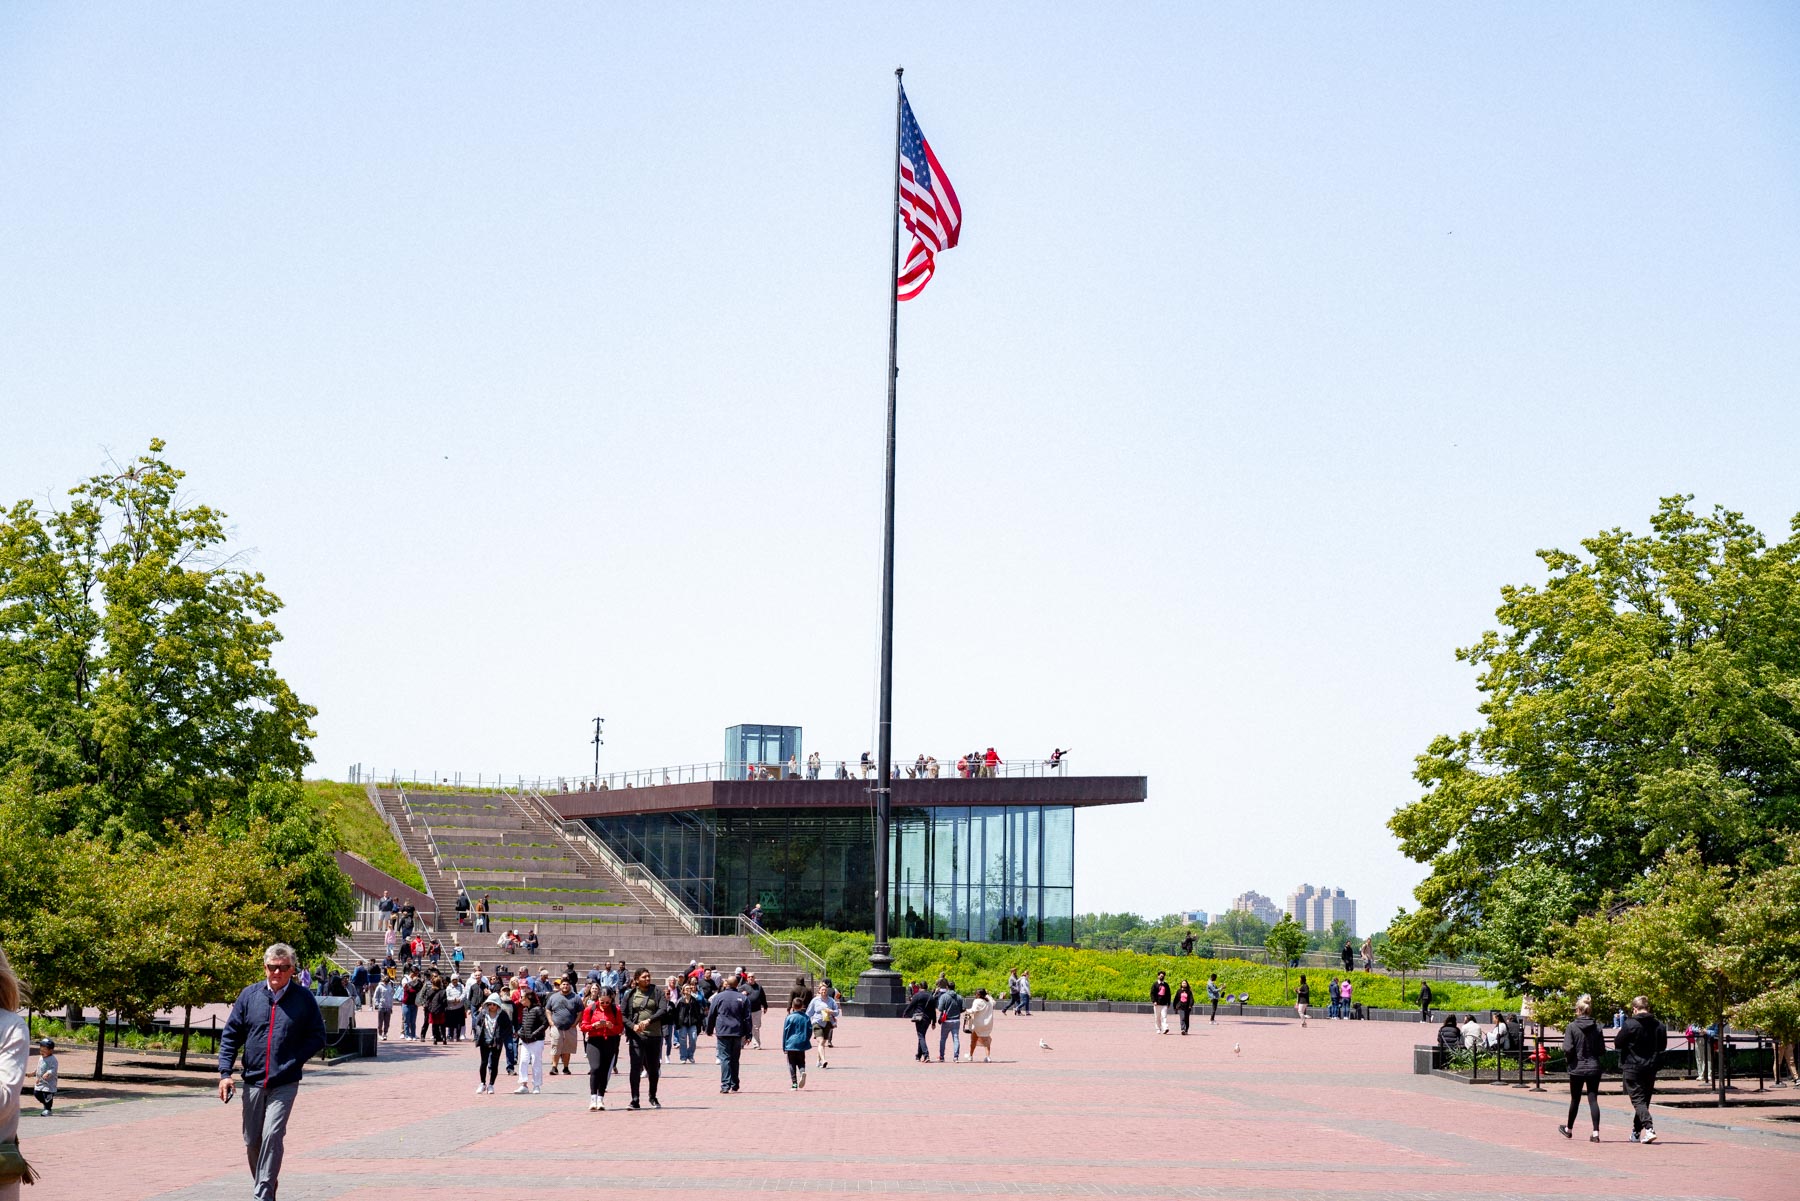 The Statue of Liberty Museum on Liberty Island